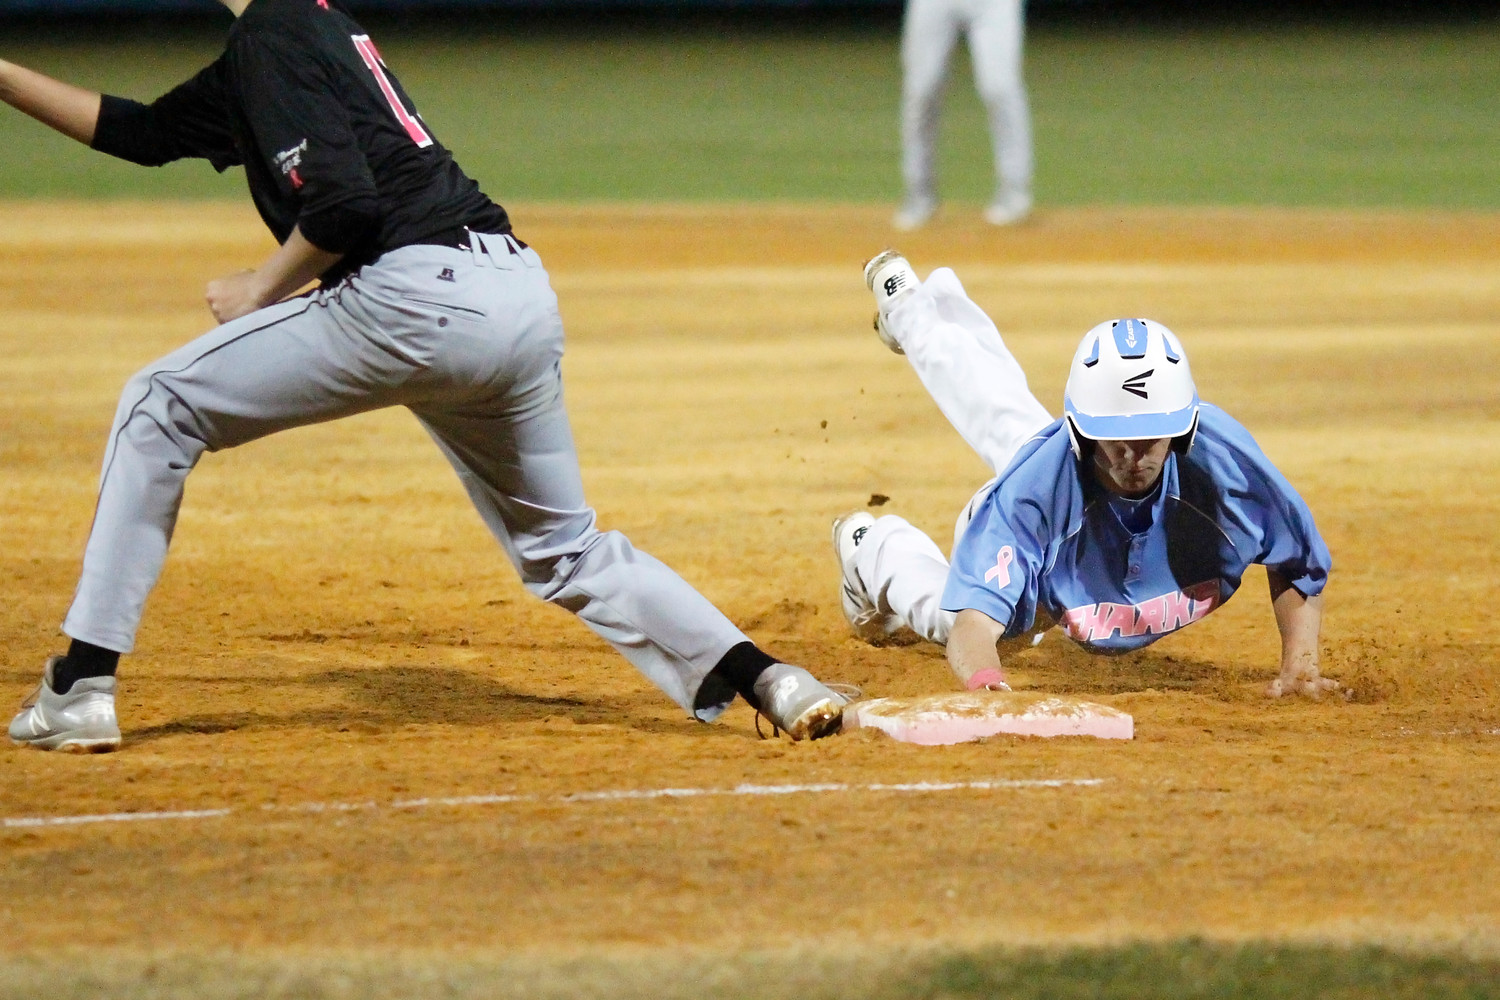 The Sharks’ Cody Nelson (4) slides back safely to first against Episcopal.